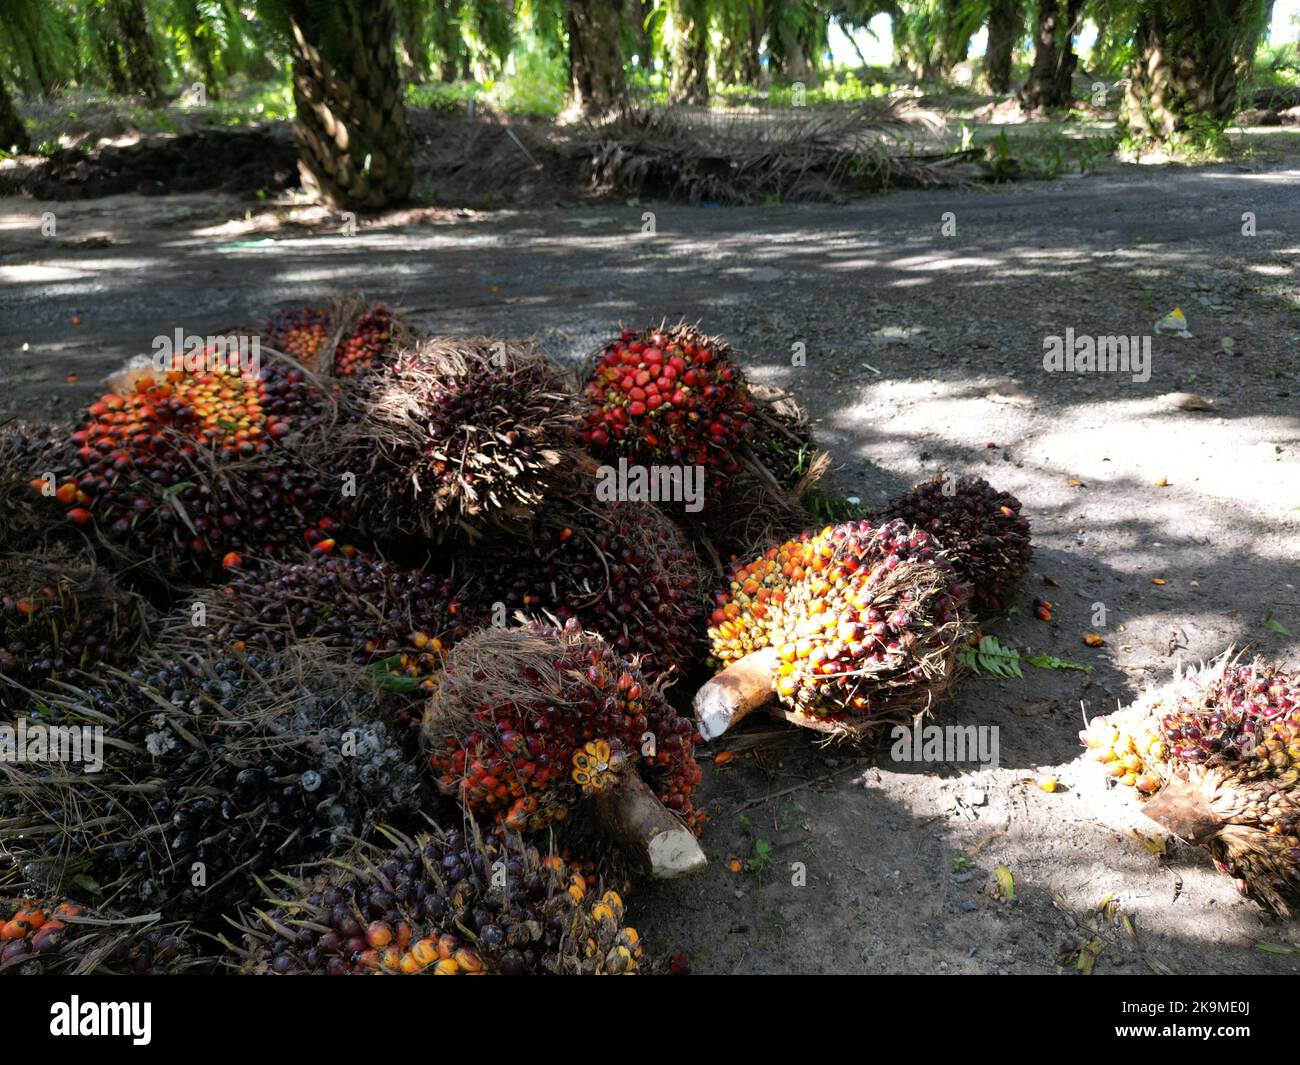 Palm oil fruits on the ground in the plantation Stock Photo